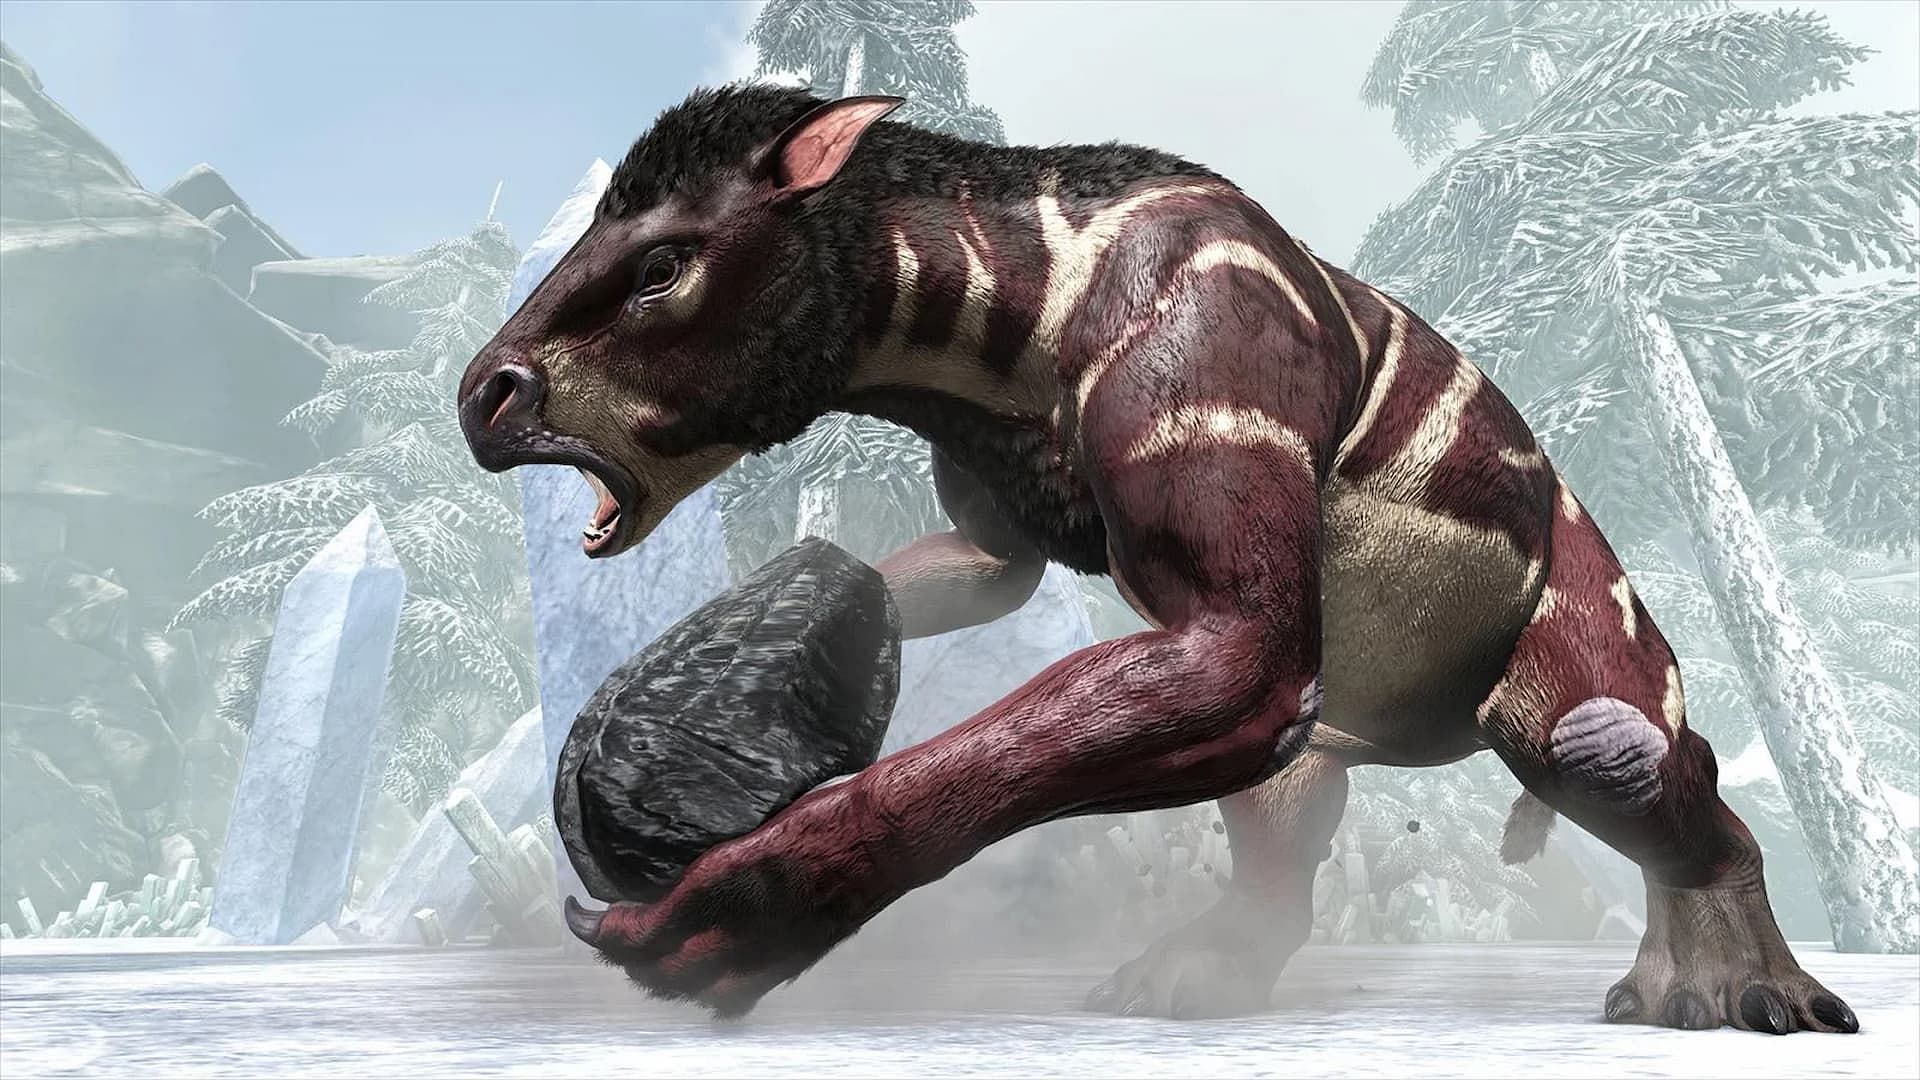 The Chalicotherium throwing boulders in ARK Survival Ascended